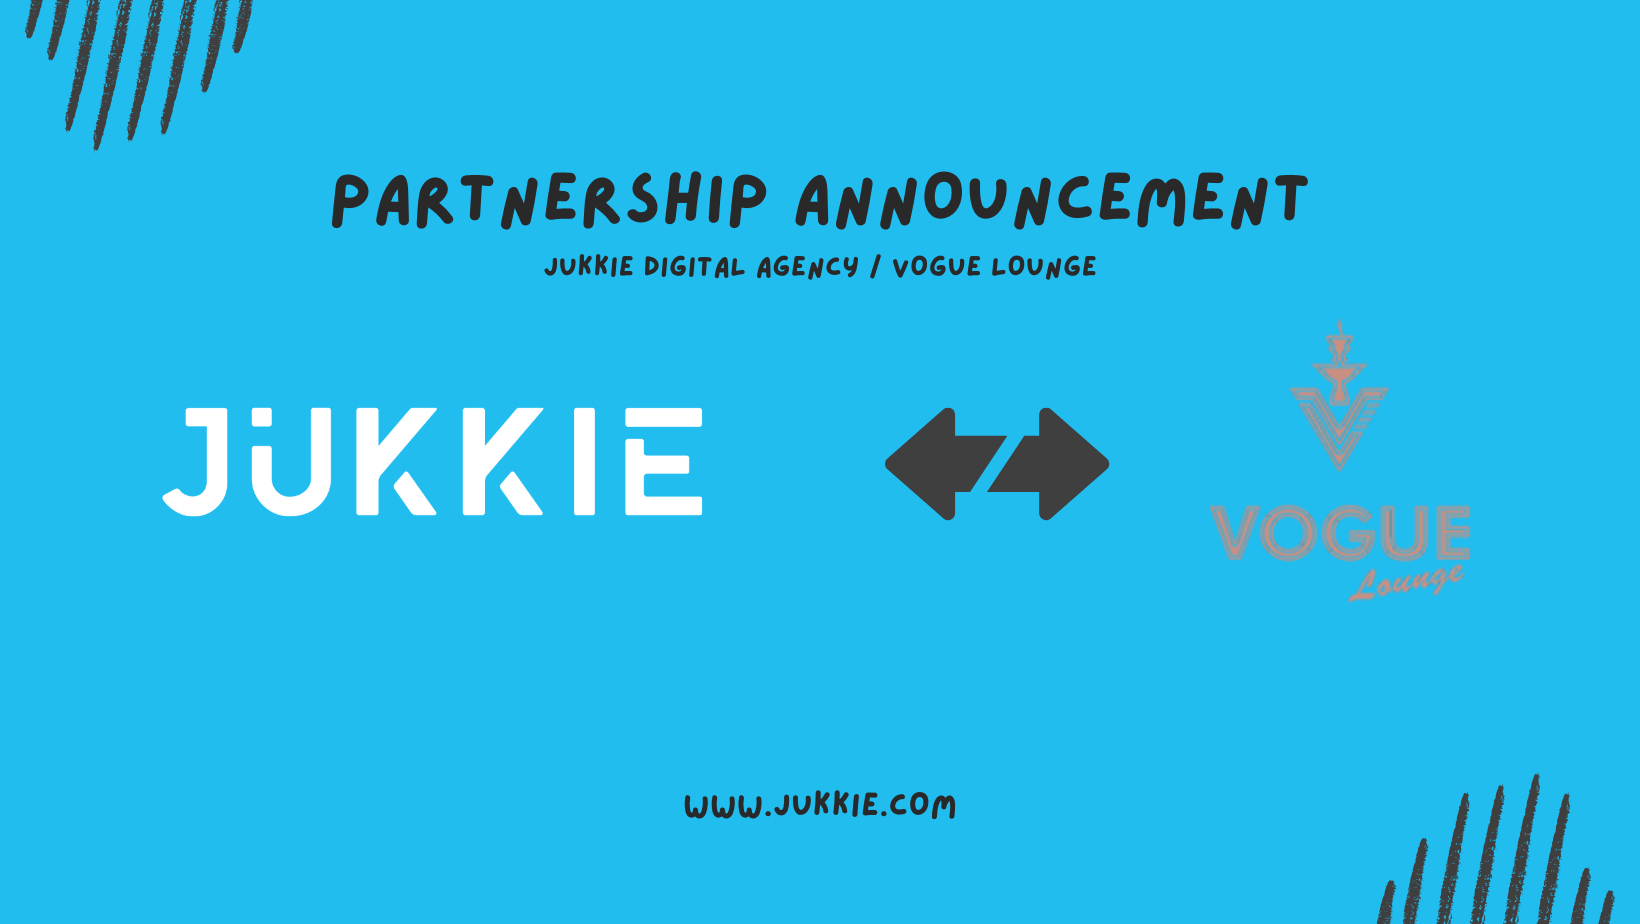 Vogue Lounge Appoints Jukkie Digital Agency as Its First Digital Partner of Record